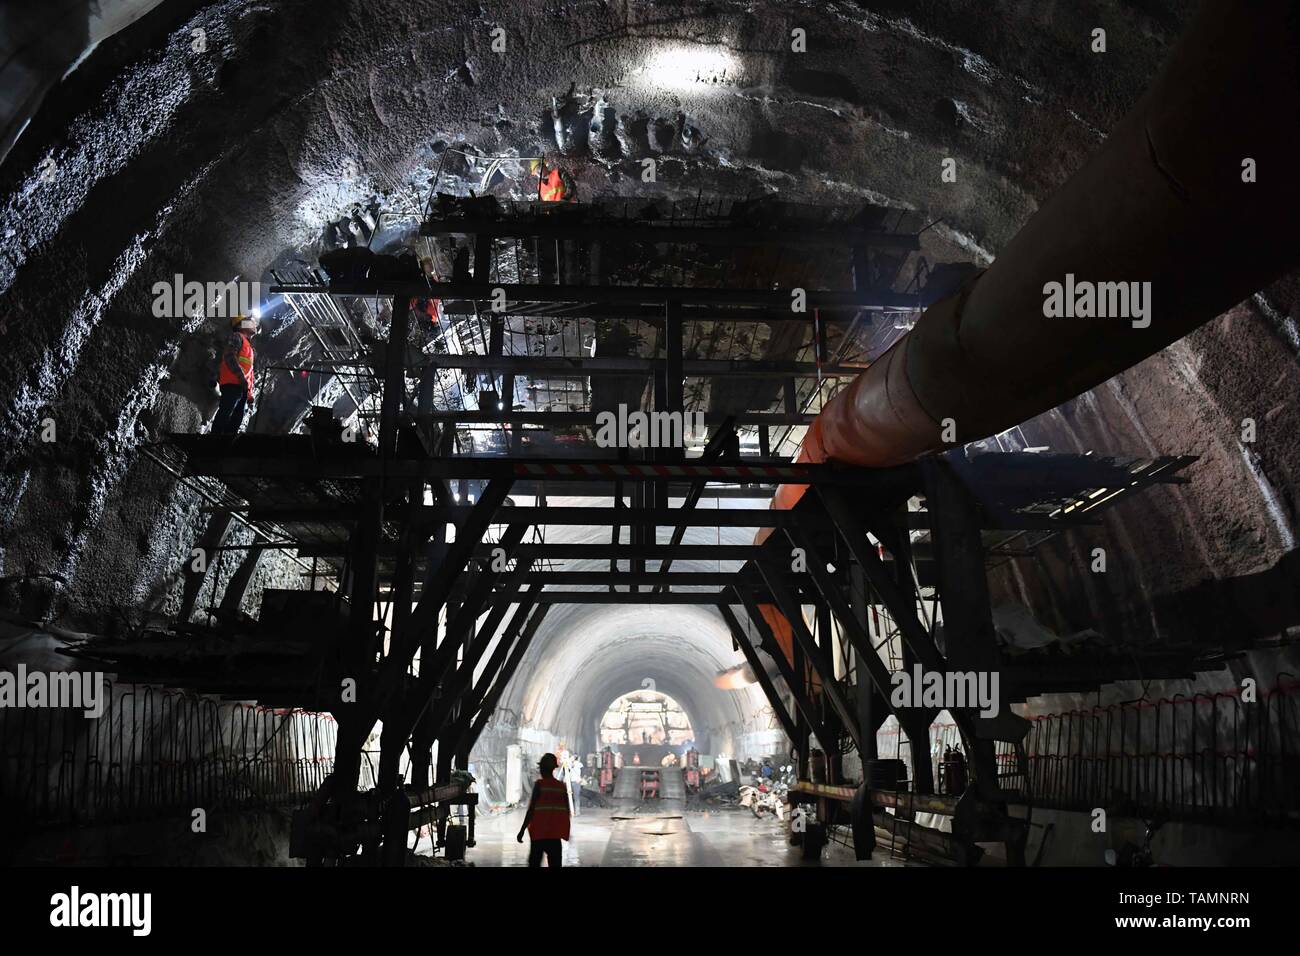 puer-25th-may-2019-constructors-work-at-the-construction-site-of-dajianshan-railway-tunnel-of-the-yuxi-mohan-railway-in-southwest-chinas-yunnan-province-may-25-2019-credit-yang-zongyouxinhuaalamy-live-news-TAMNRN.jpg